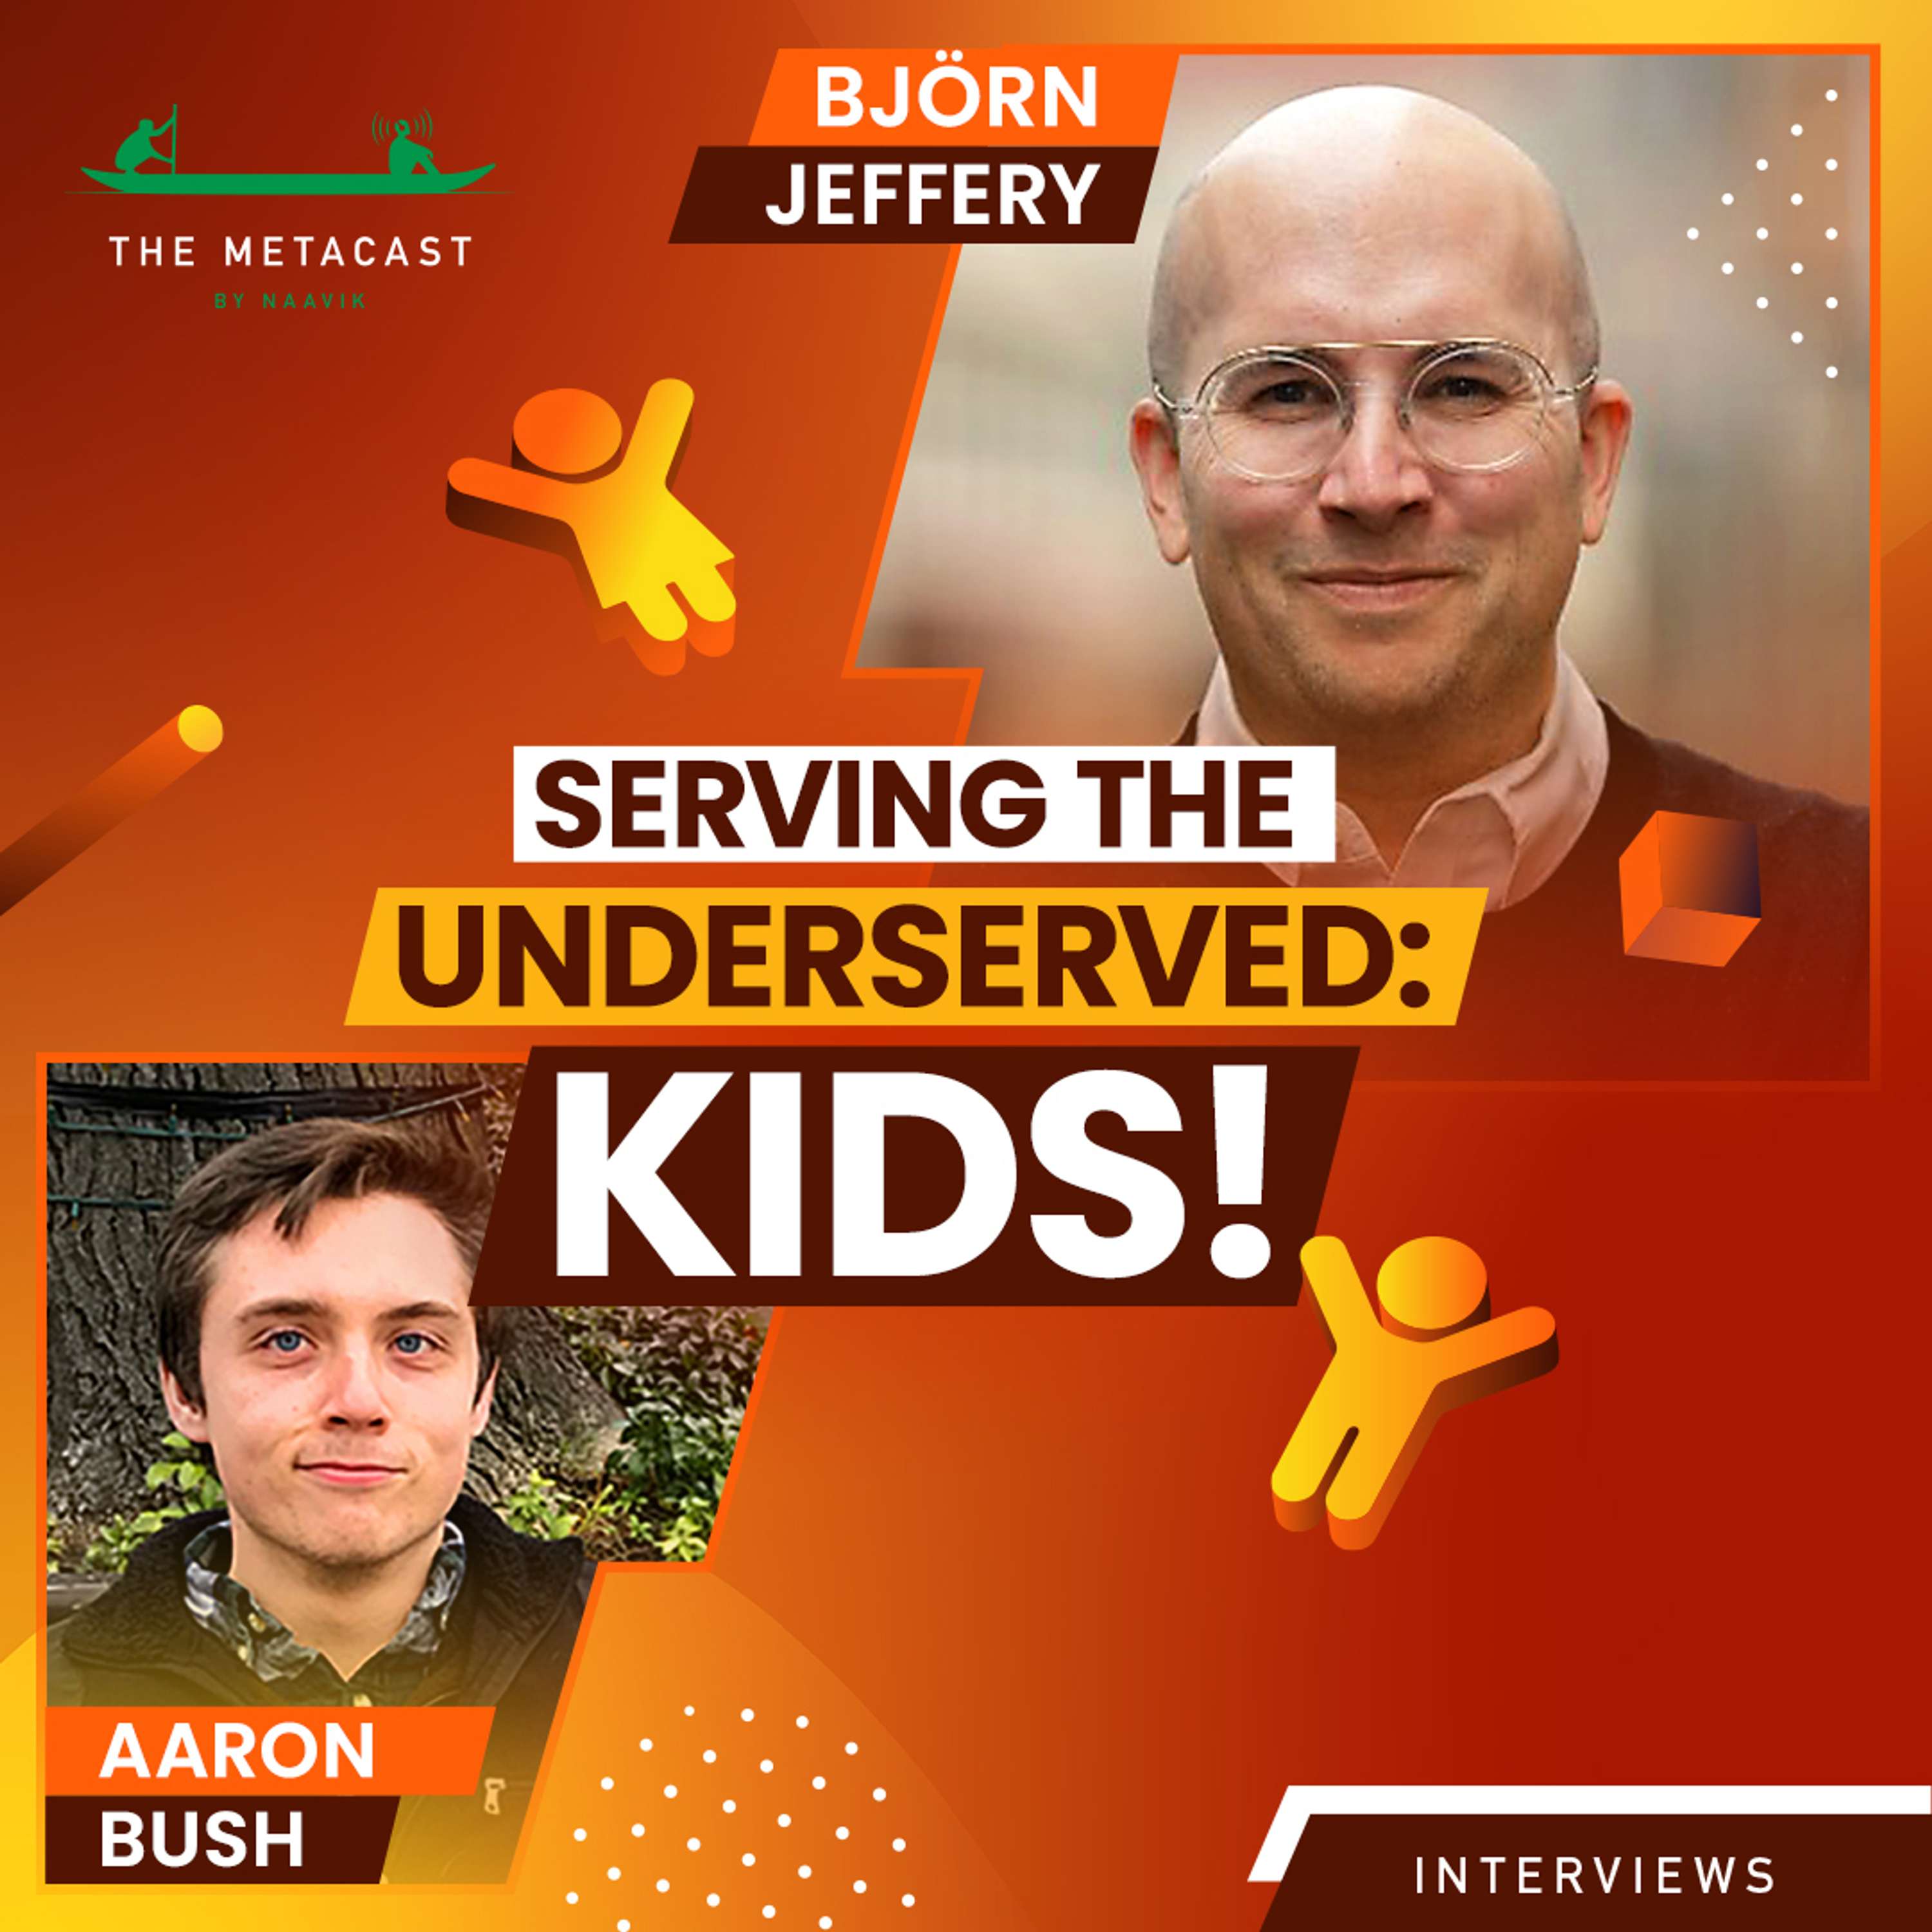 Björn Jeffery: How to Conquer the Kids Market